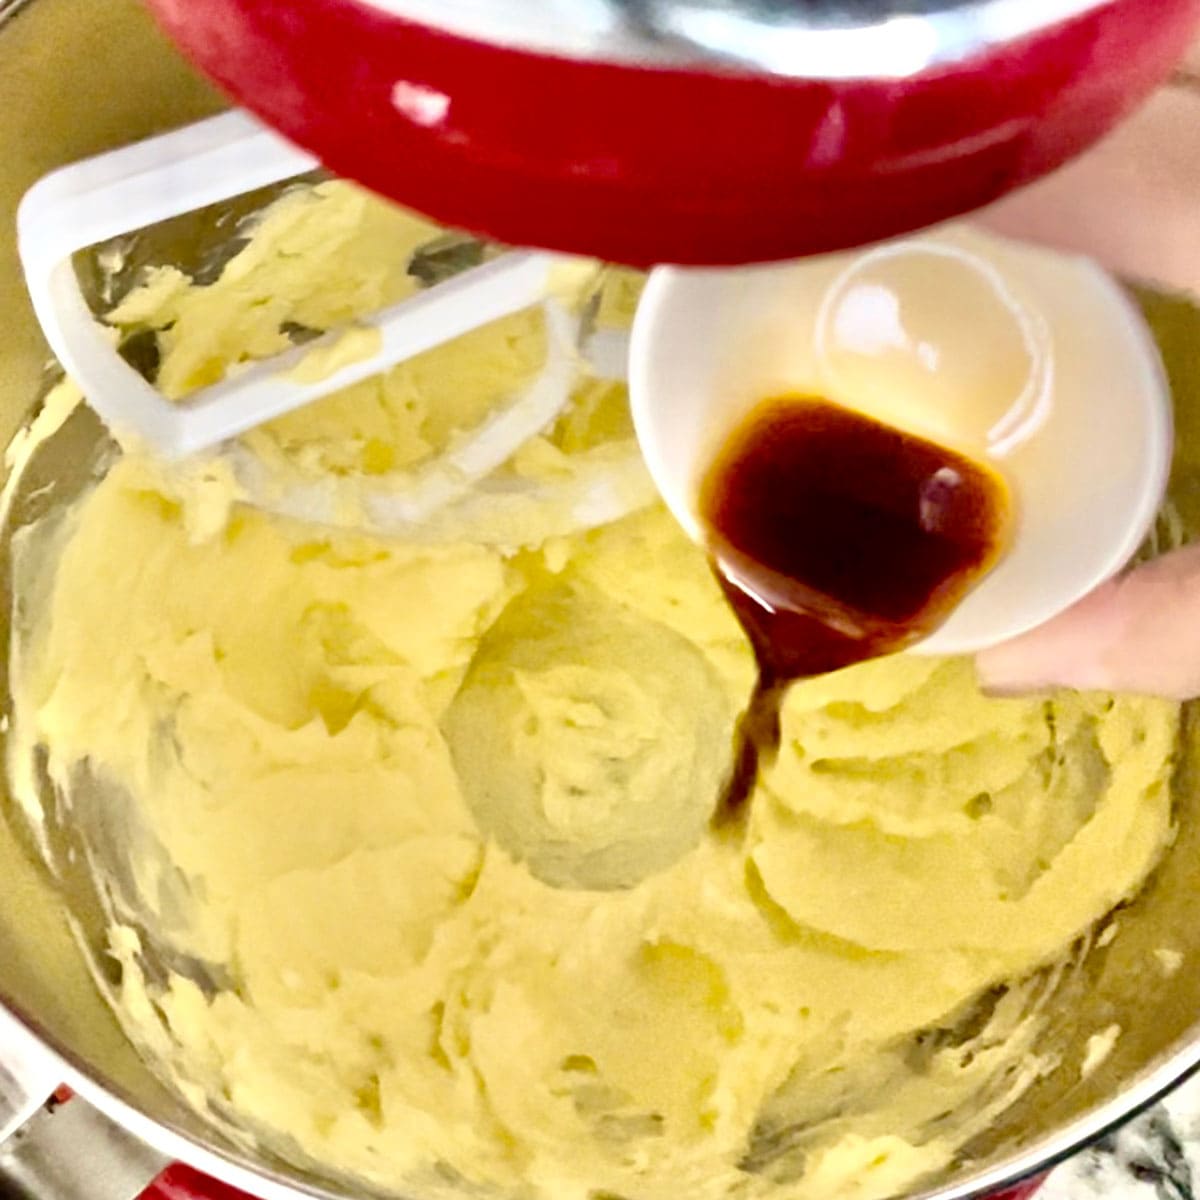 Fluffed butter and vanilla extract in mixing bowl.